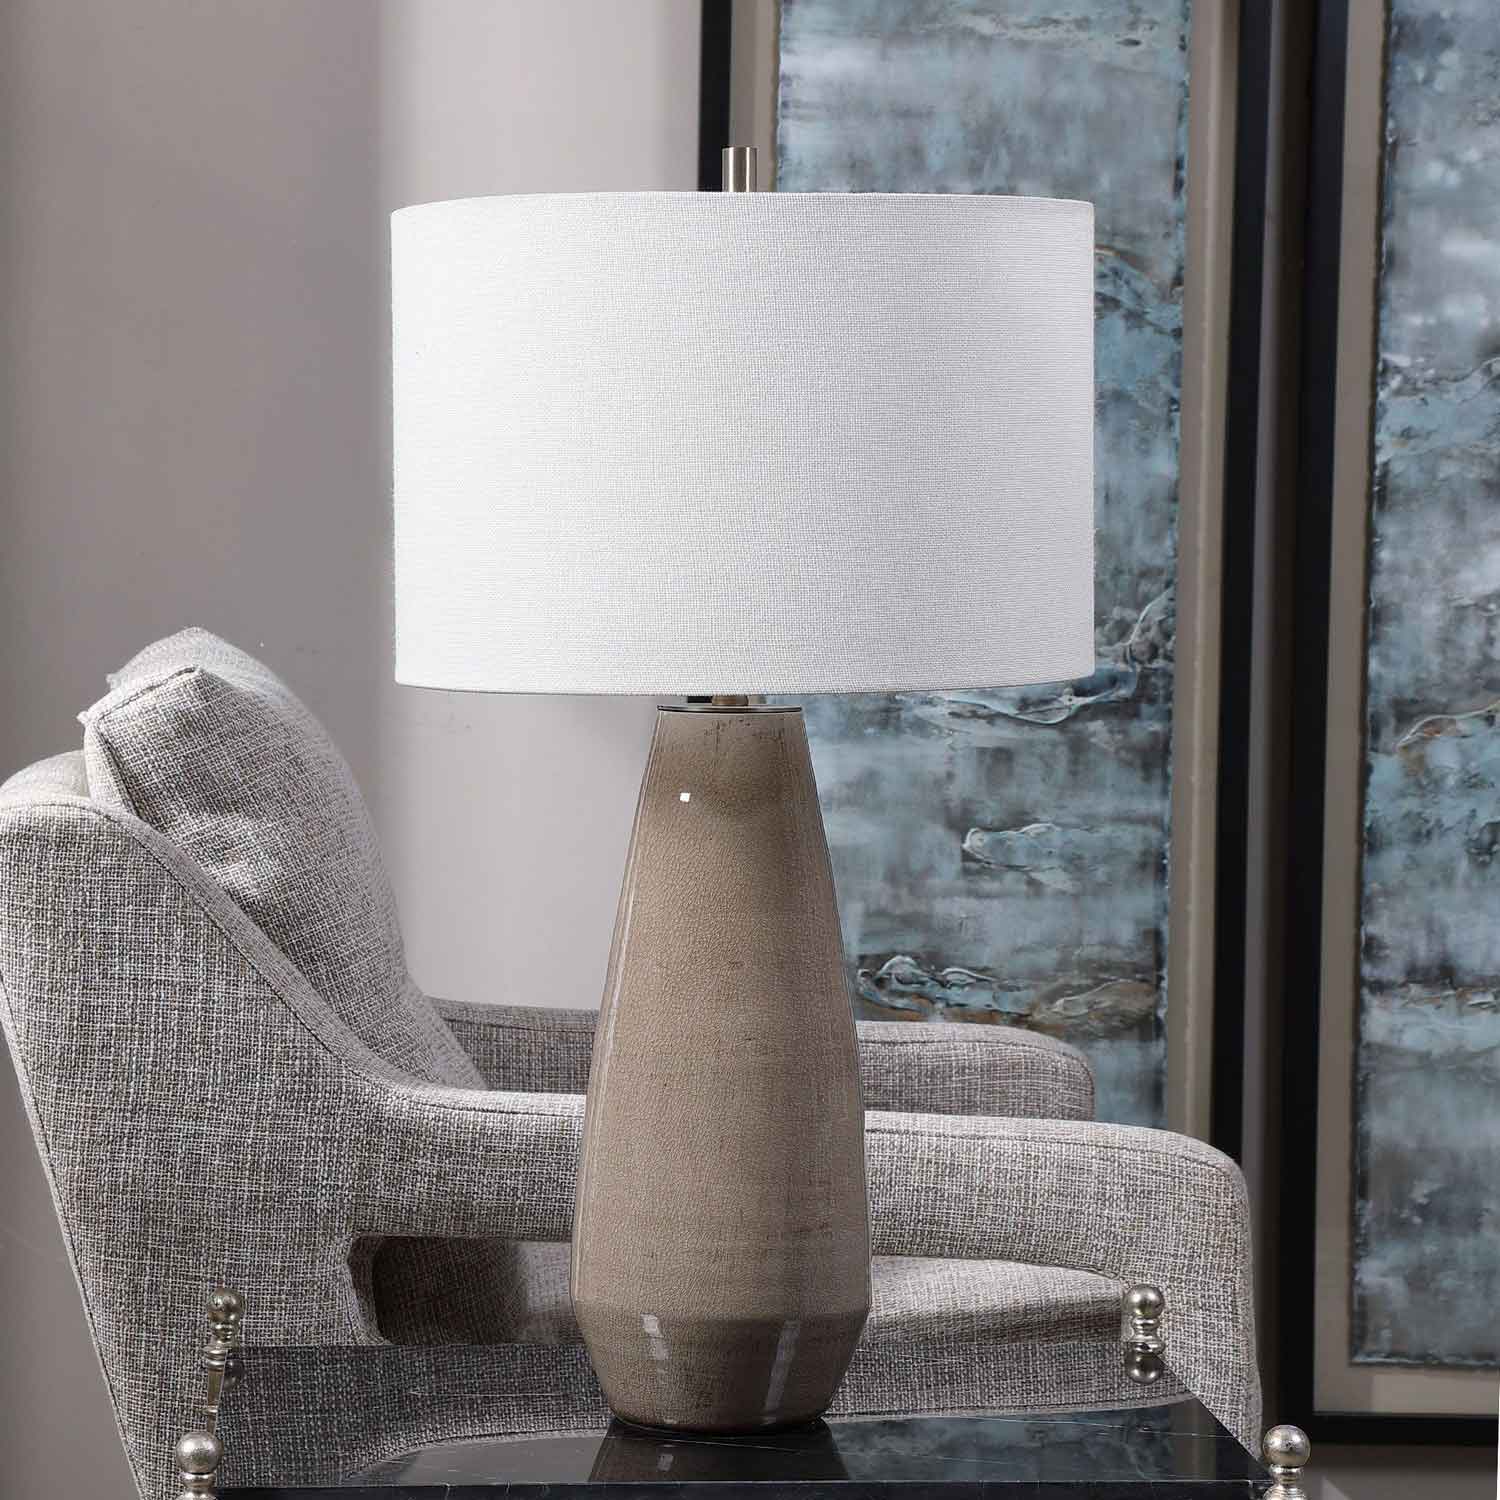 Uttermost Volterra Table Lamp - Taupe/Gray